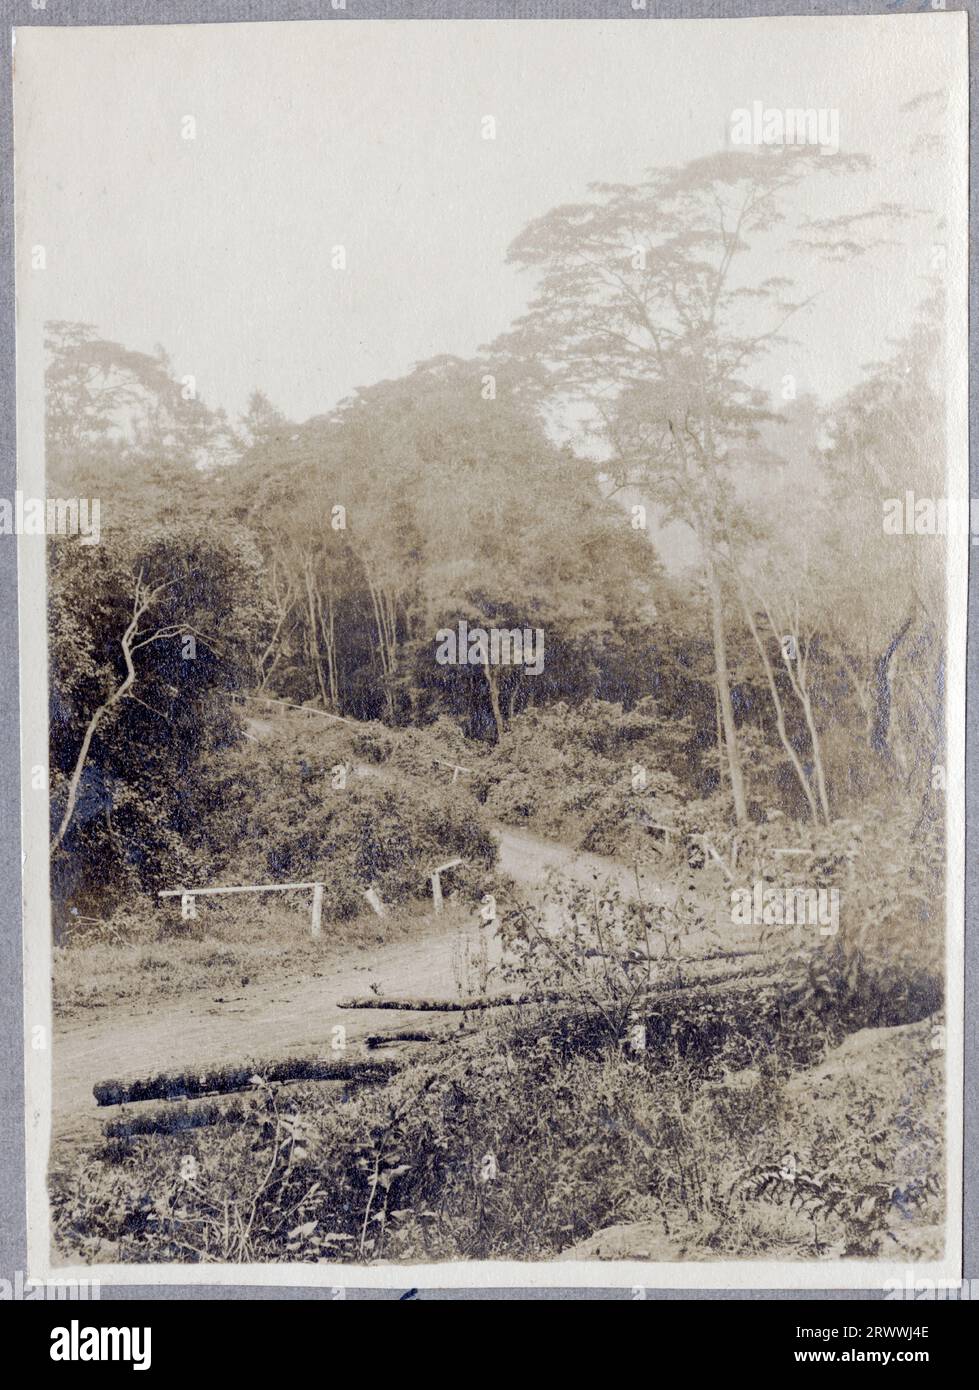 View of a river, taken from the right bank looking downstream as the river bends through some rapids, low hills in the background.  Original manuscript caption: Tana River 1916. Stock Photo